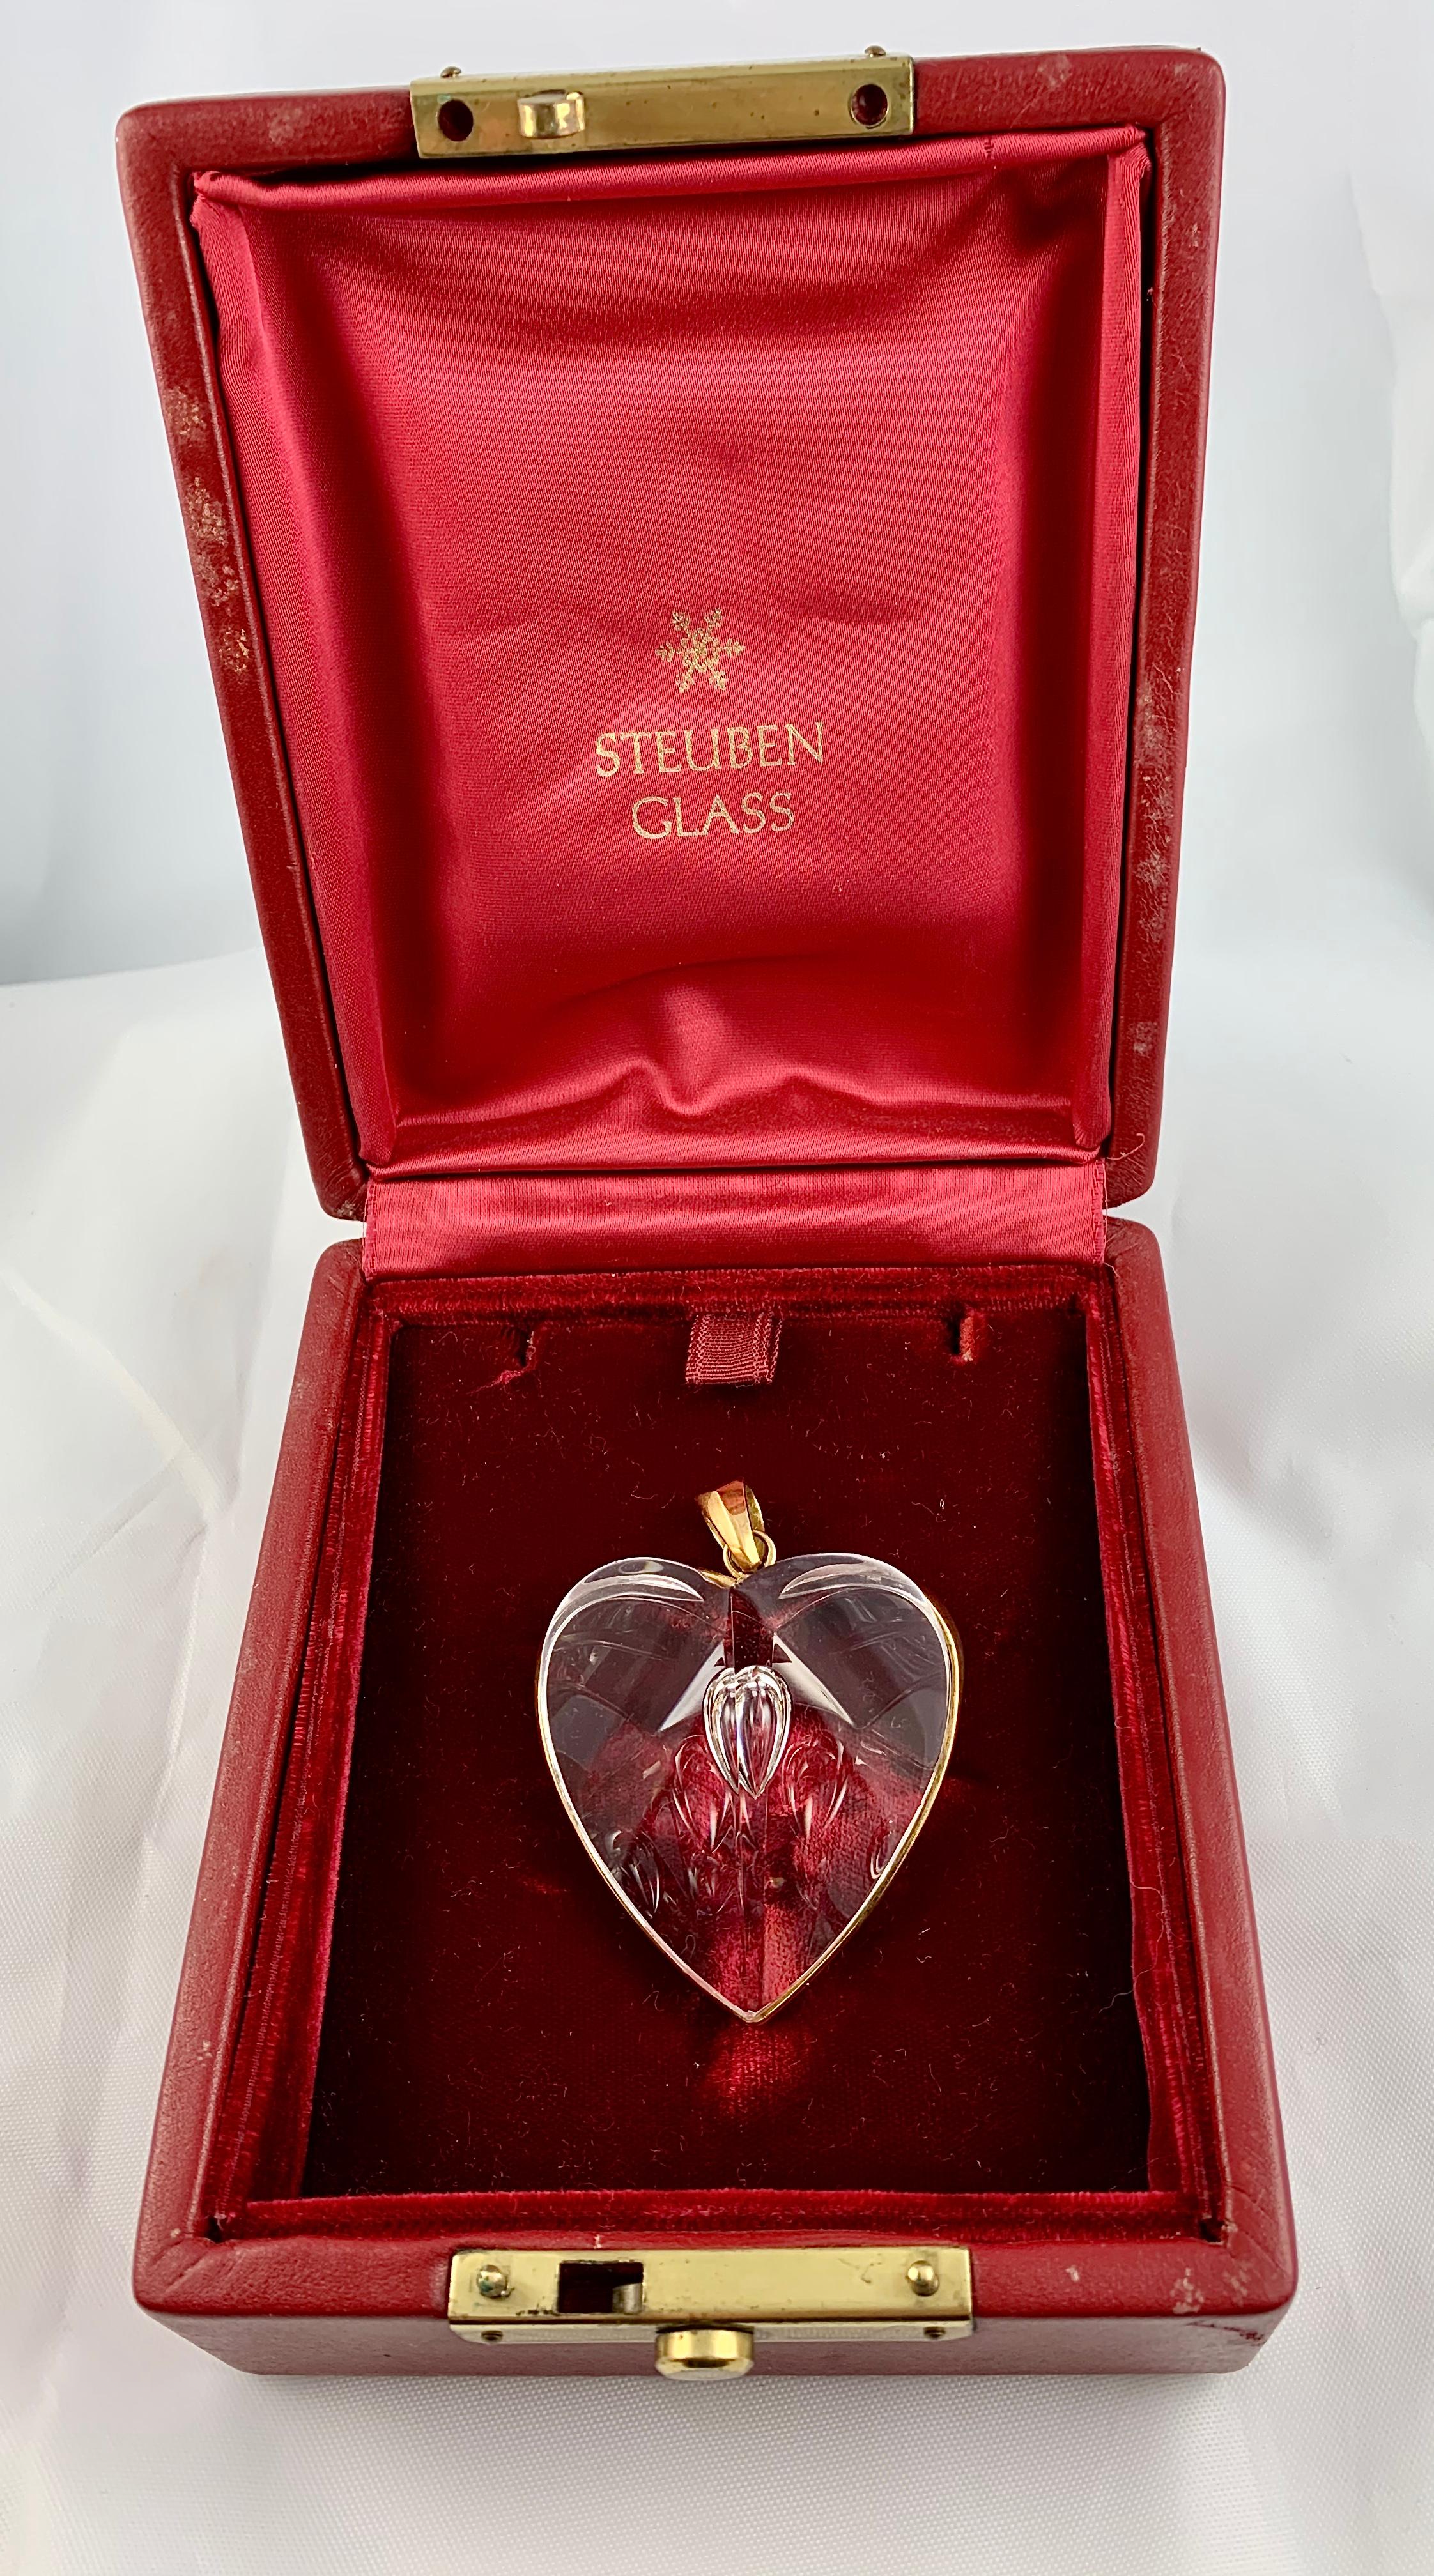 Gorgeous Vintage Steuben Glass Heart Shaped Pendant in Original Box. The Heart Features an Inverted Teardrop Bubble inside. As you can see from the pictures, the heart has a beautiful array of refraction! 